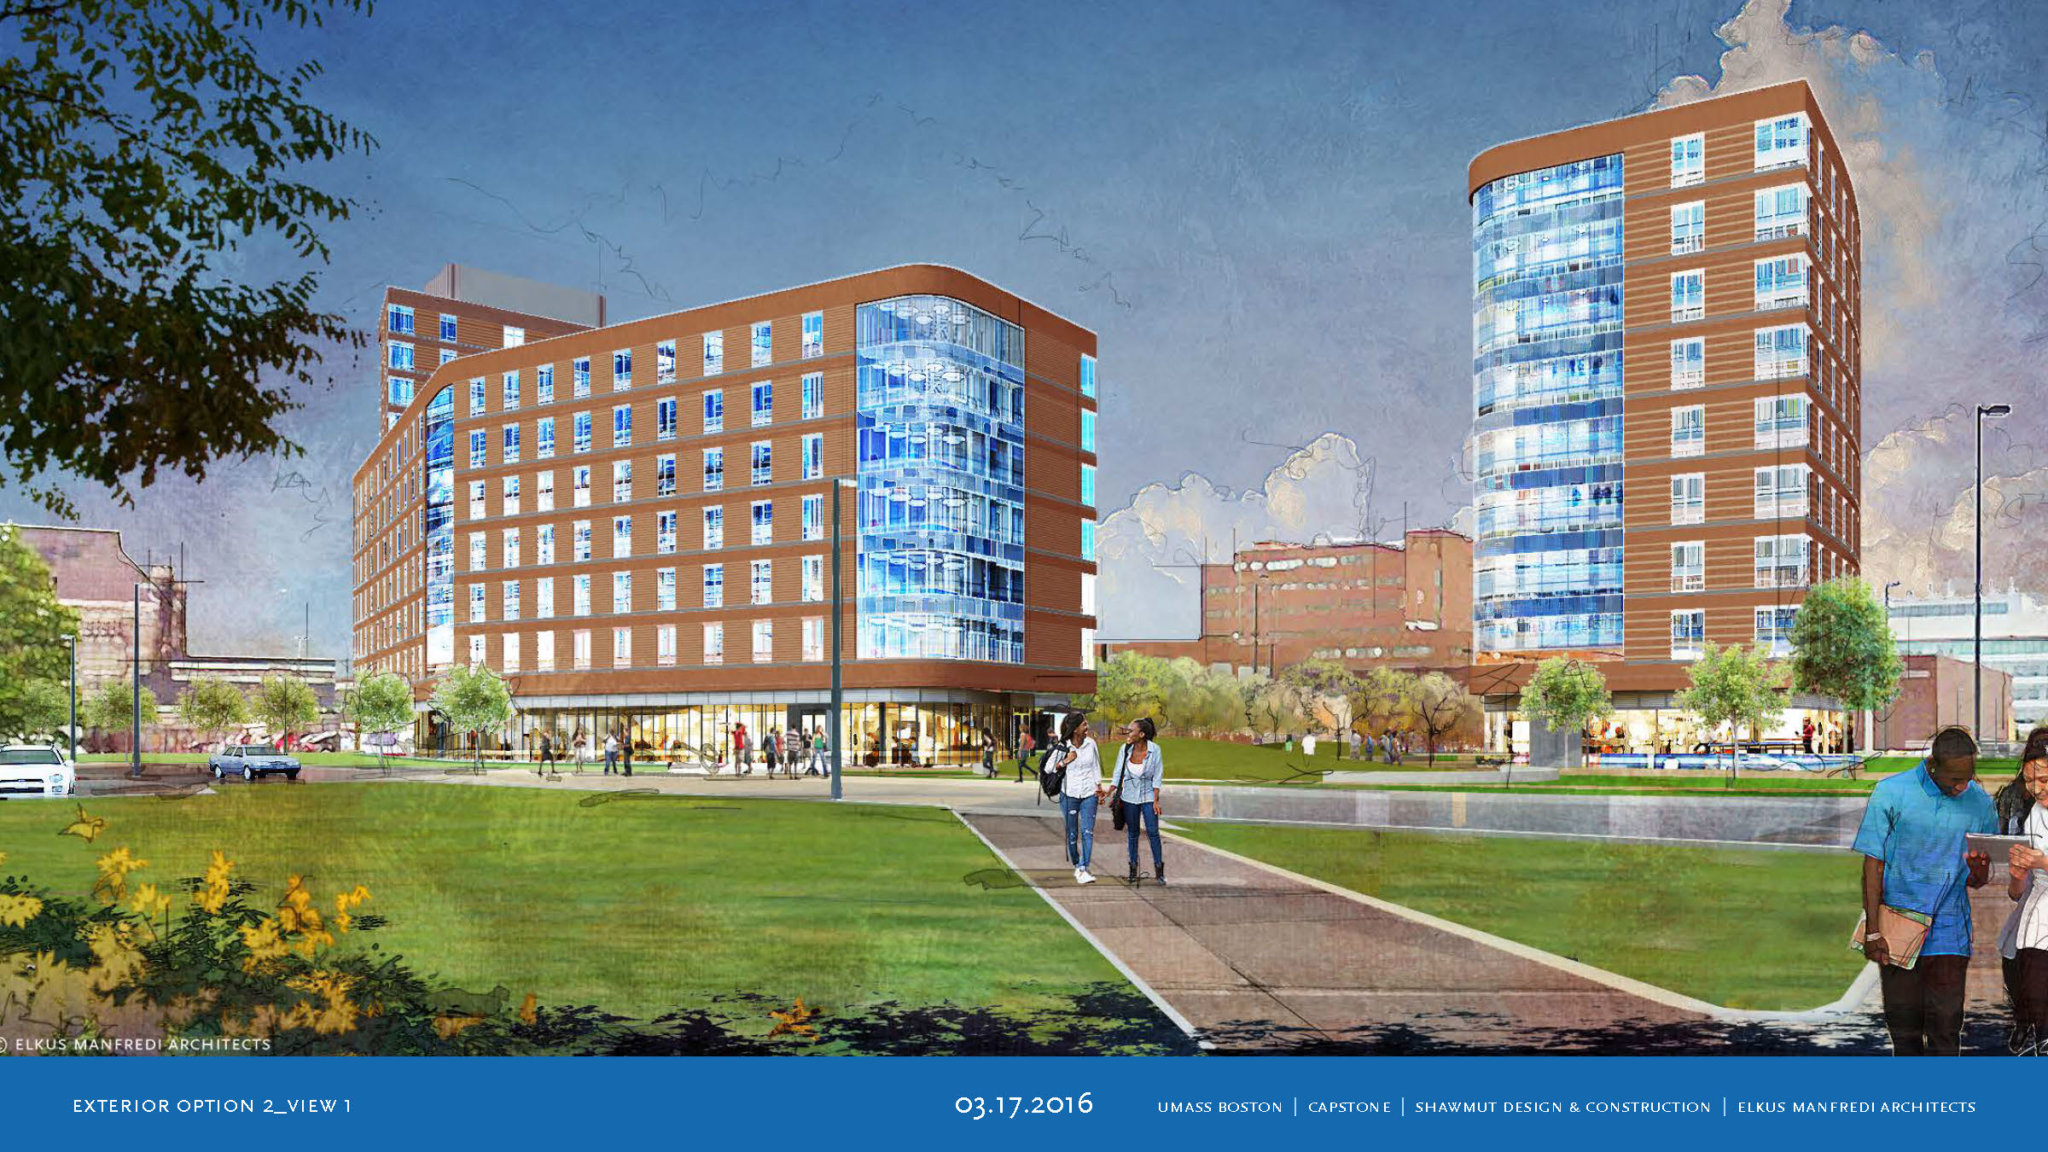 UMass Boston breaks ground on firstever oncampus housing project